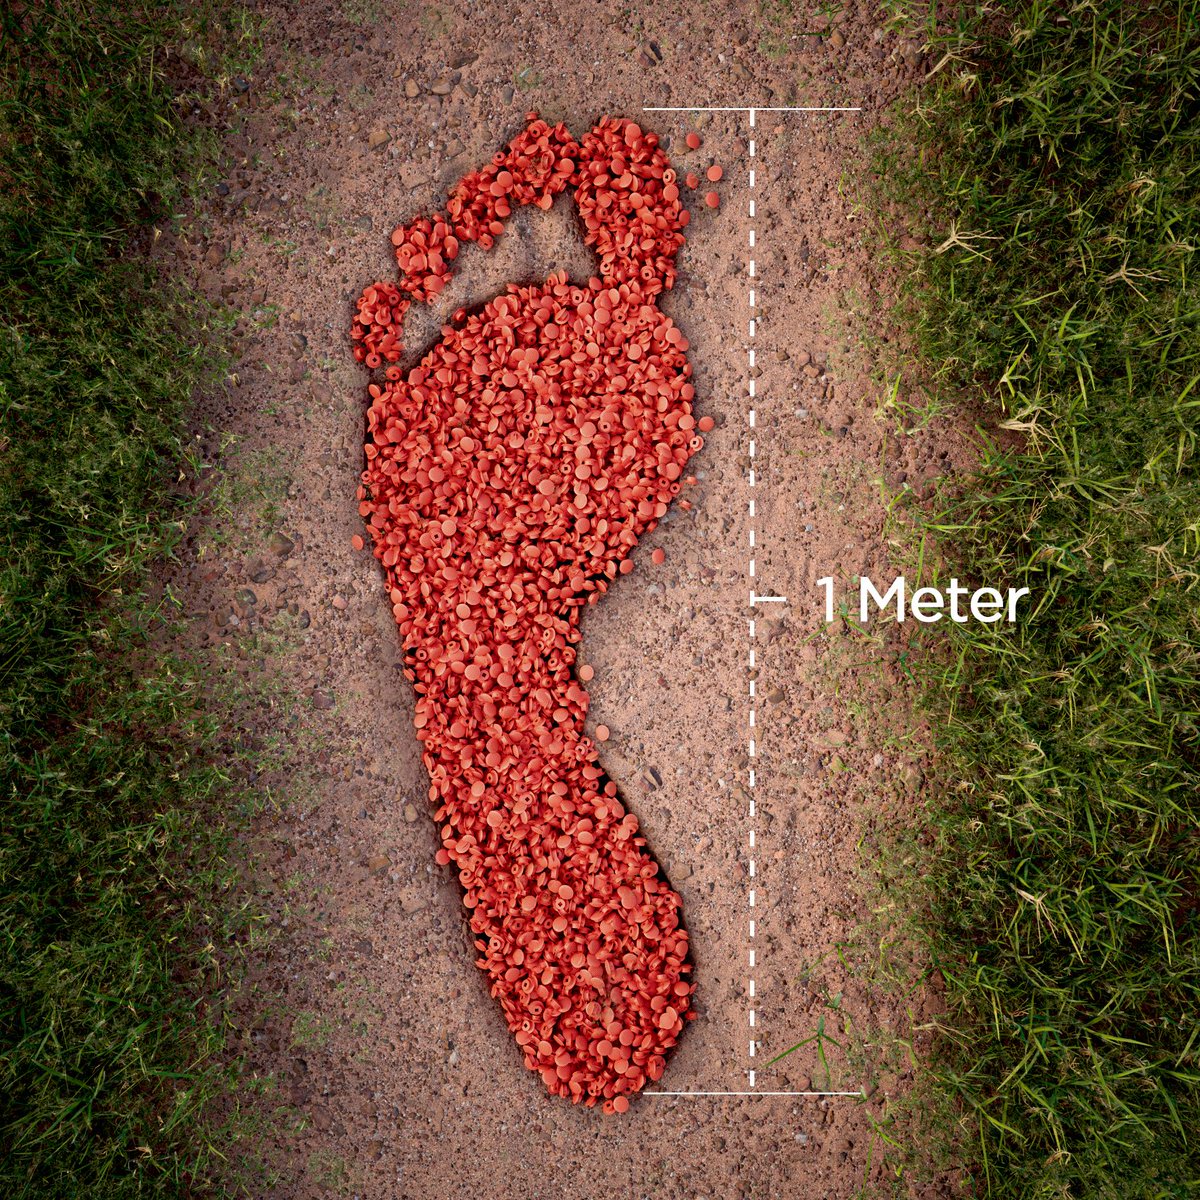 Did you know that the largest footprint on Earth is over a meter long? Can you imagine how many TrackPoints we could fit in that thing? 👣